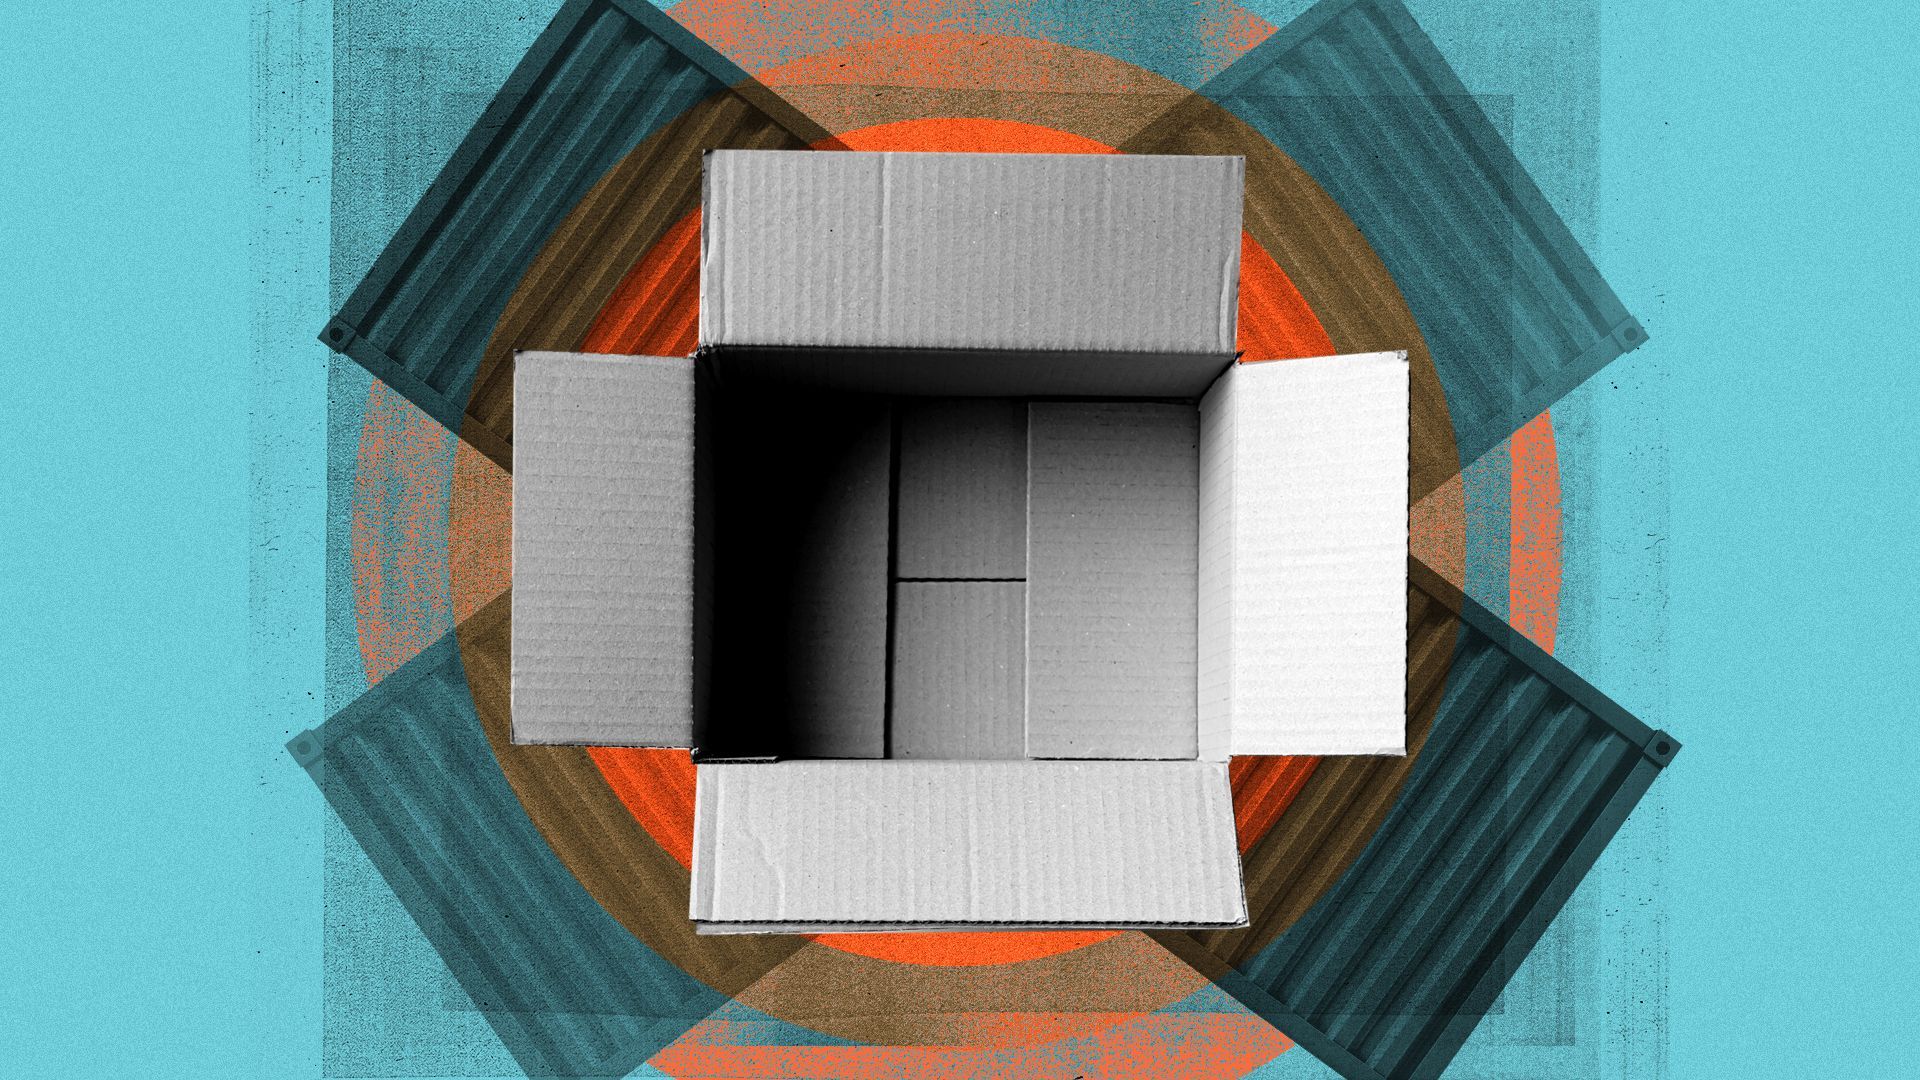 Illustration collage of an open cardboard box sitting above shipping containers and geometric shapes